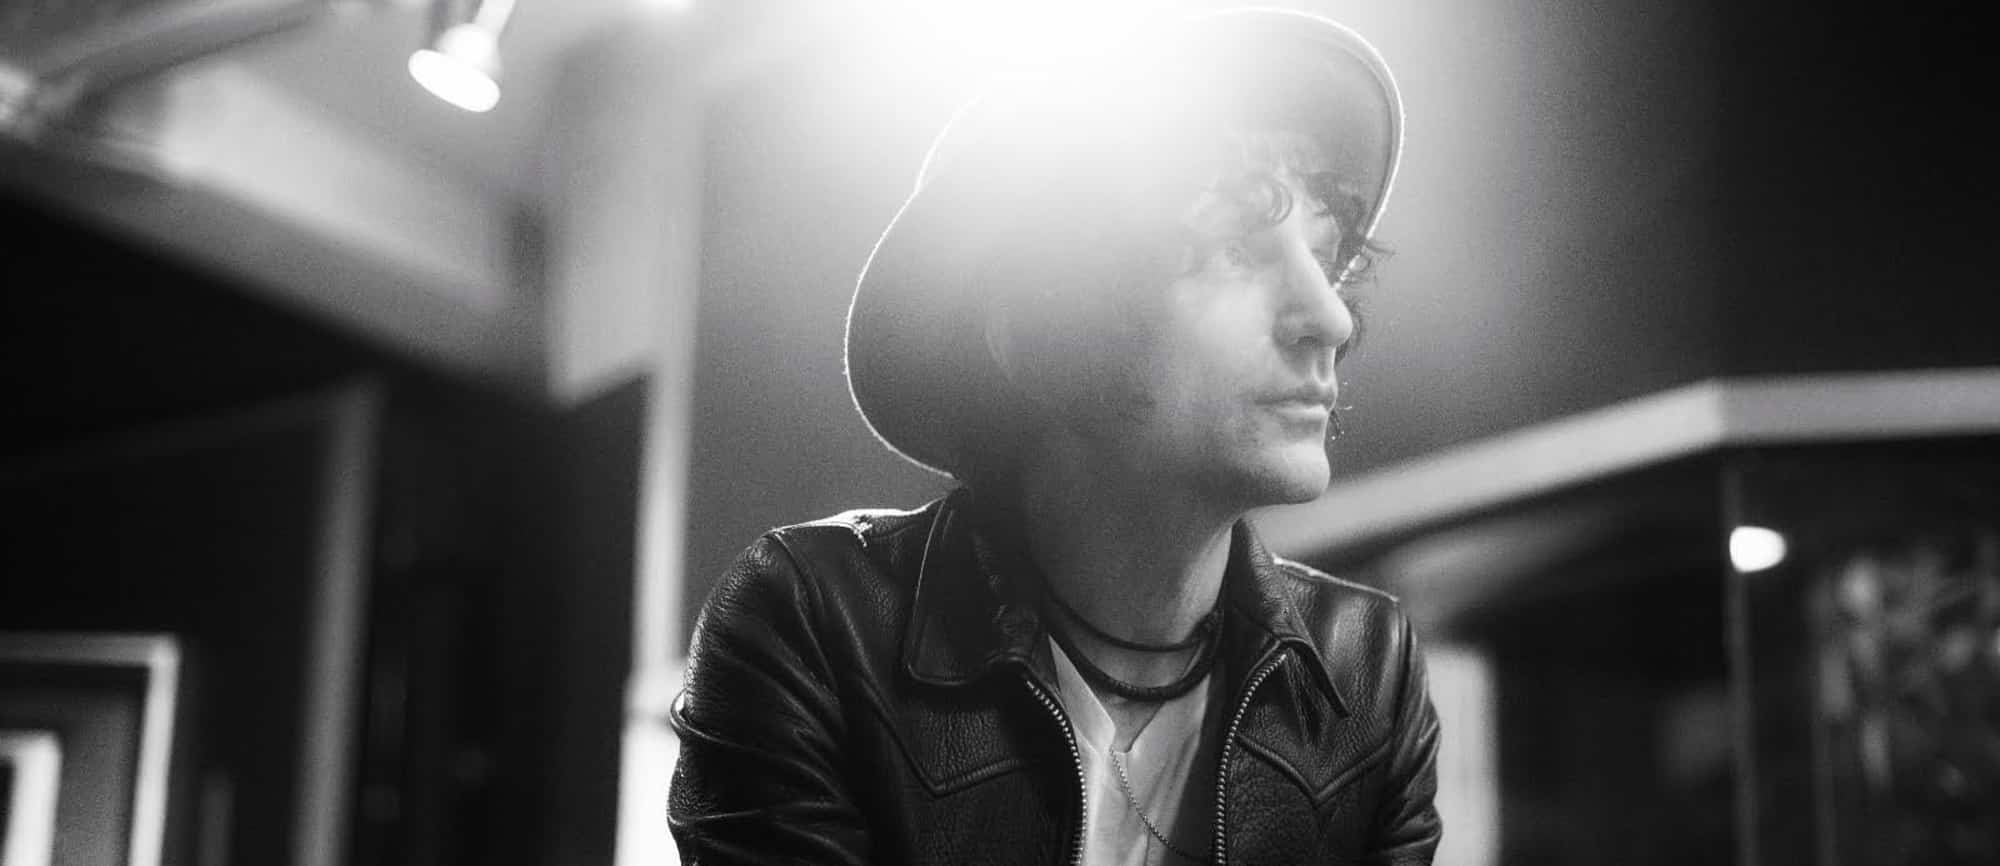 Jesse Malin Takes “Write About What You Love” Approach to Songwriting